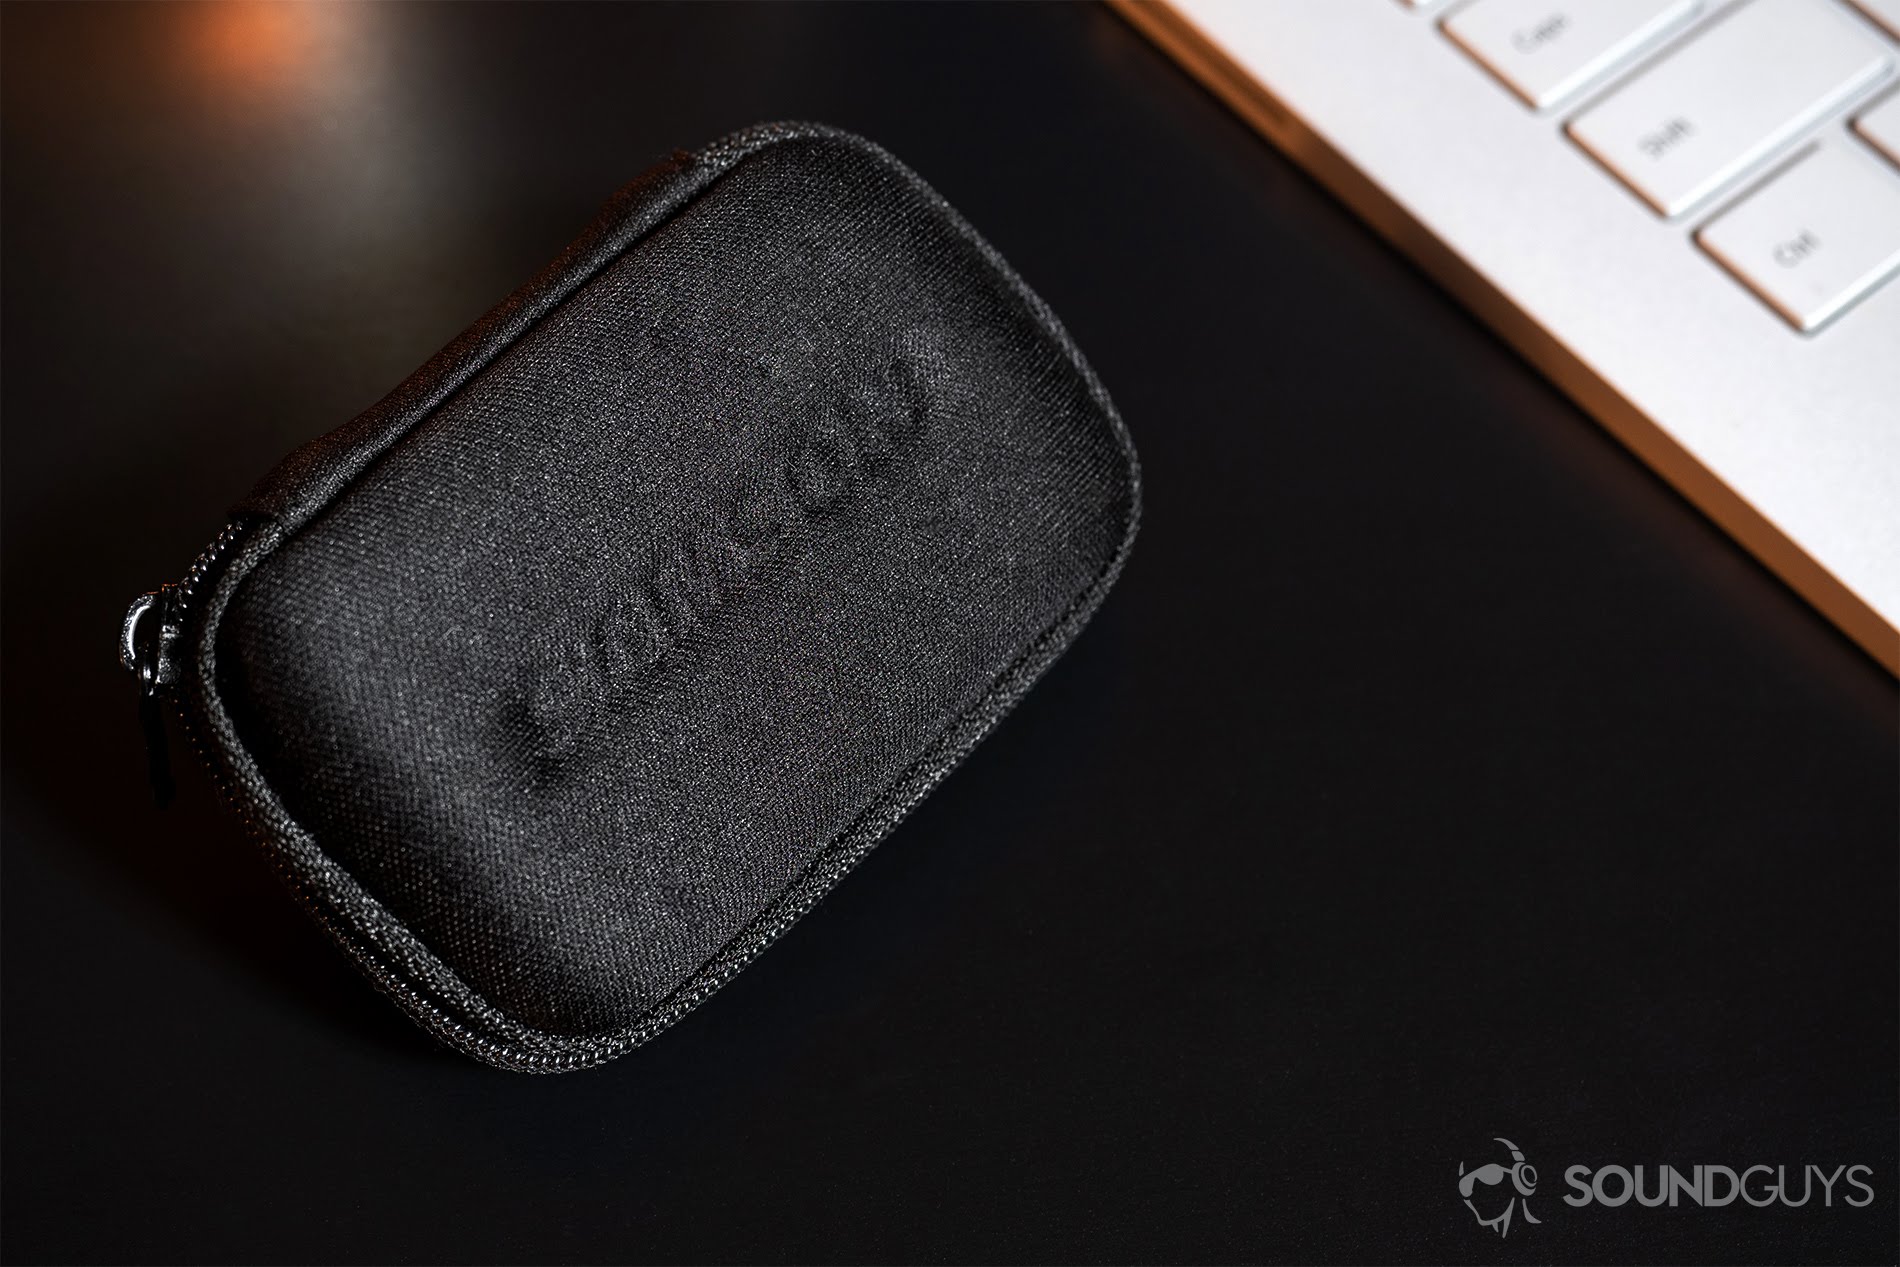 Samson Go Mic: Image of the zippered carrying case.